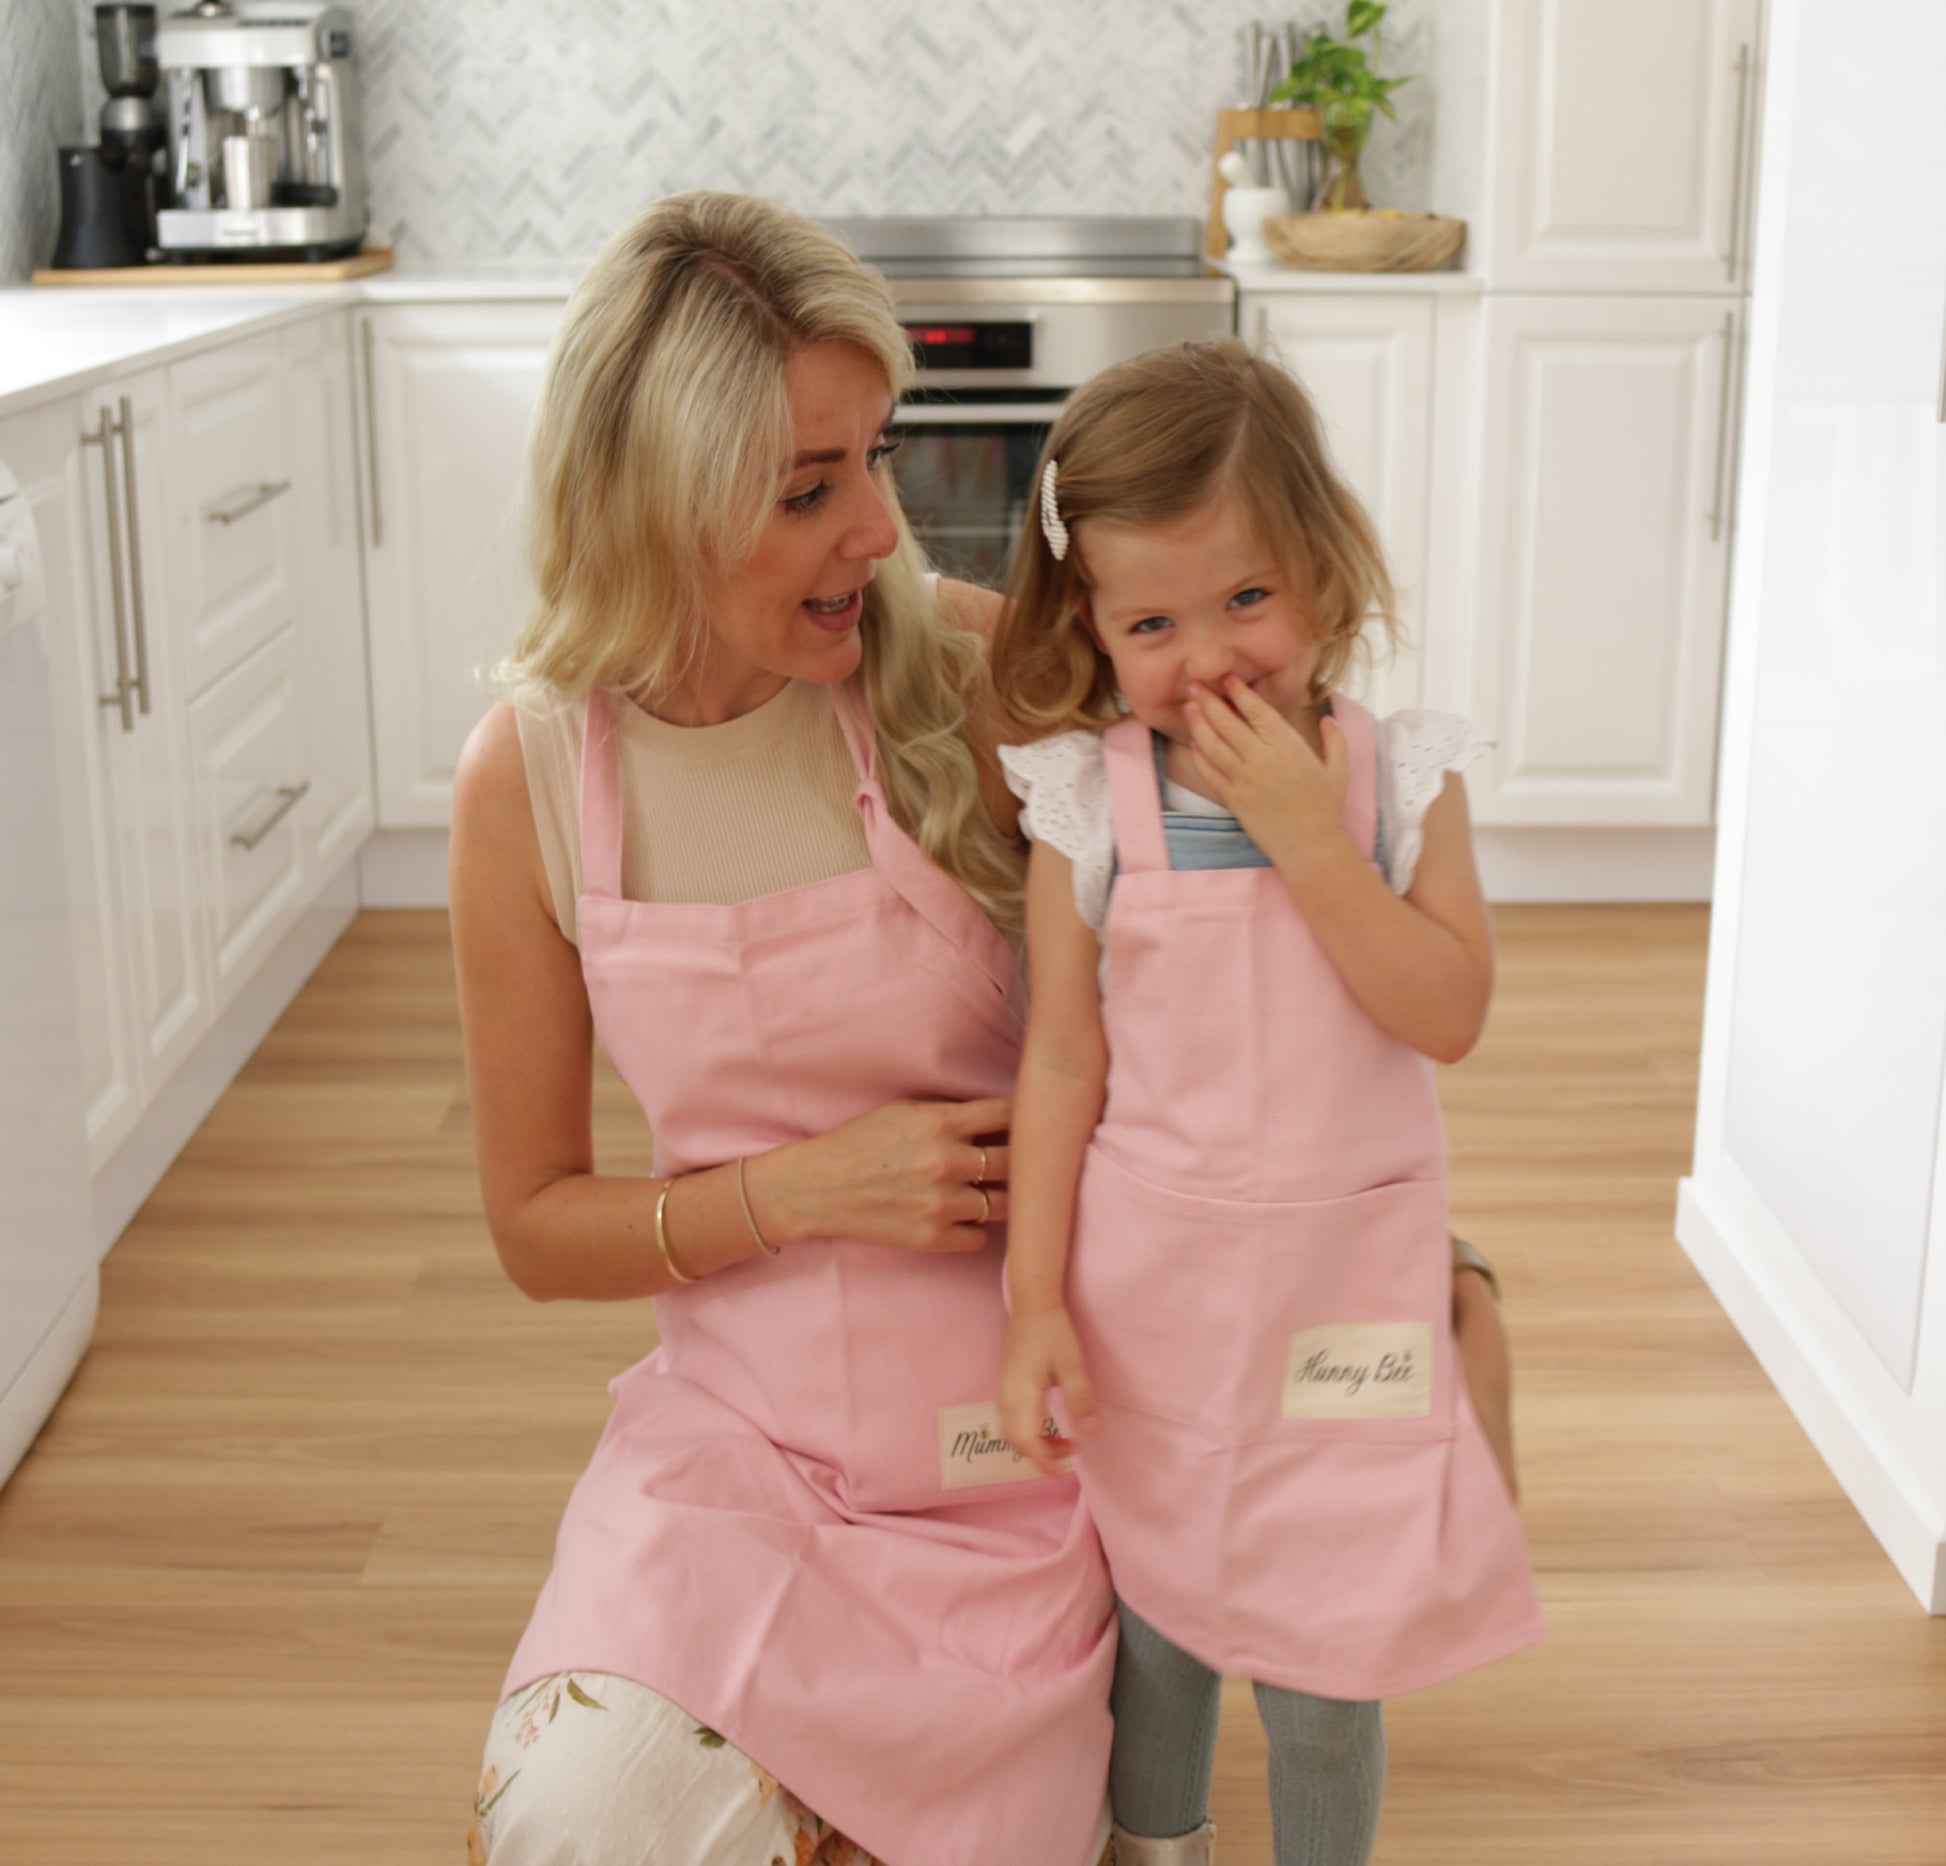 Personalized Mommy and Me Aprons, Matching Mother Daughter Apron